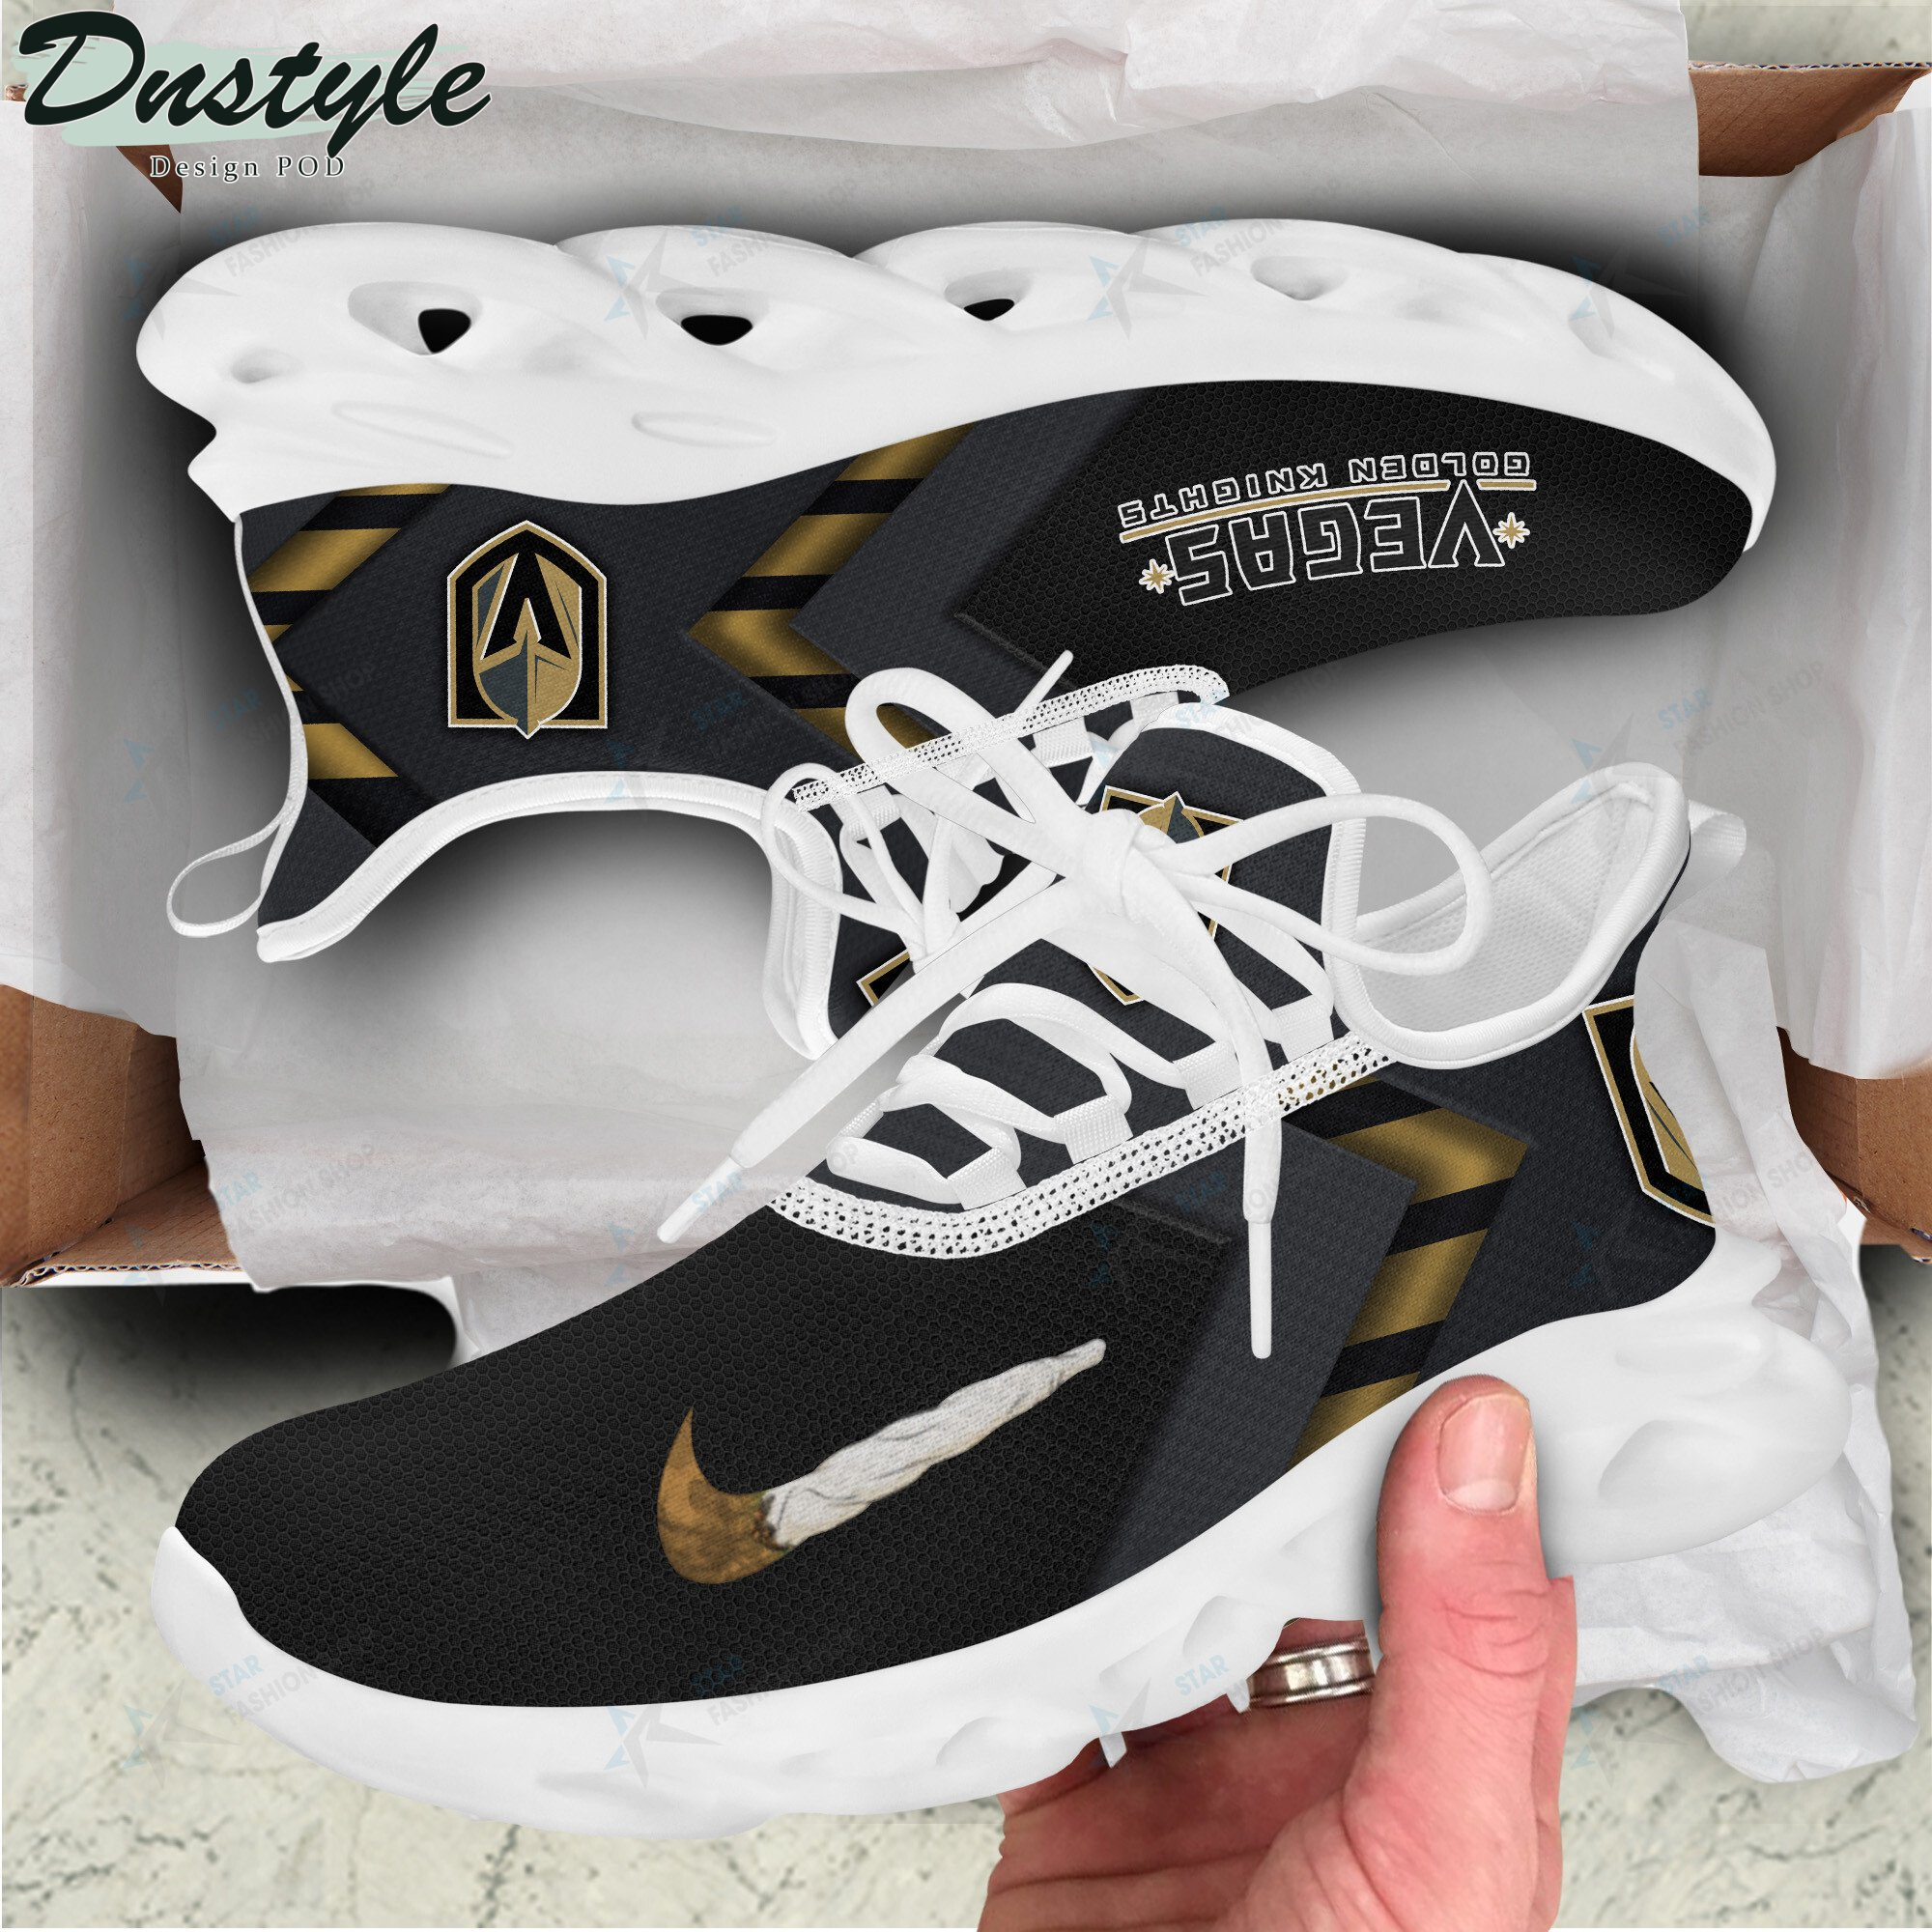 Vegas Golden Knights max soul shoes